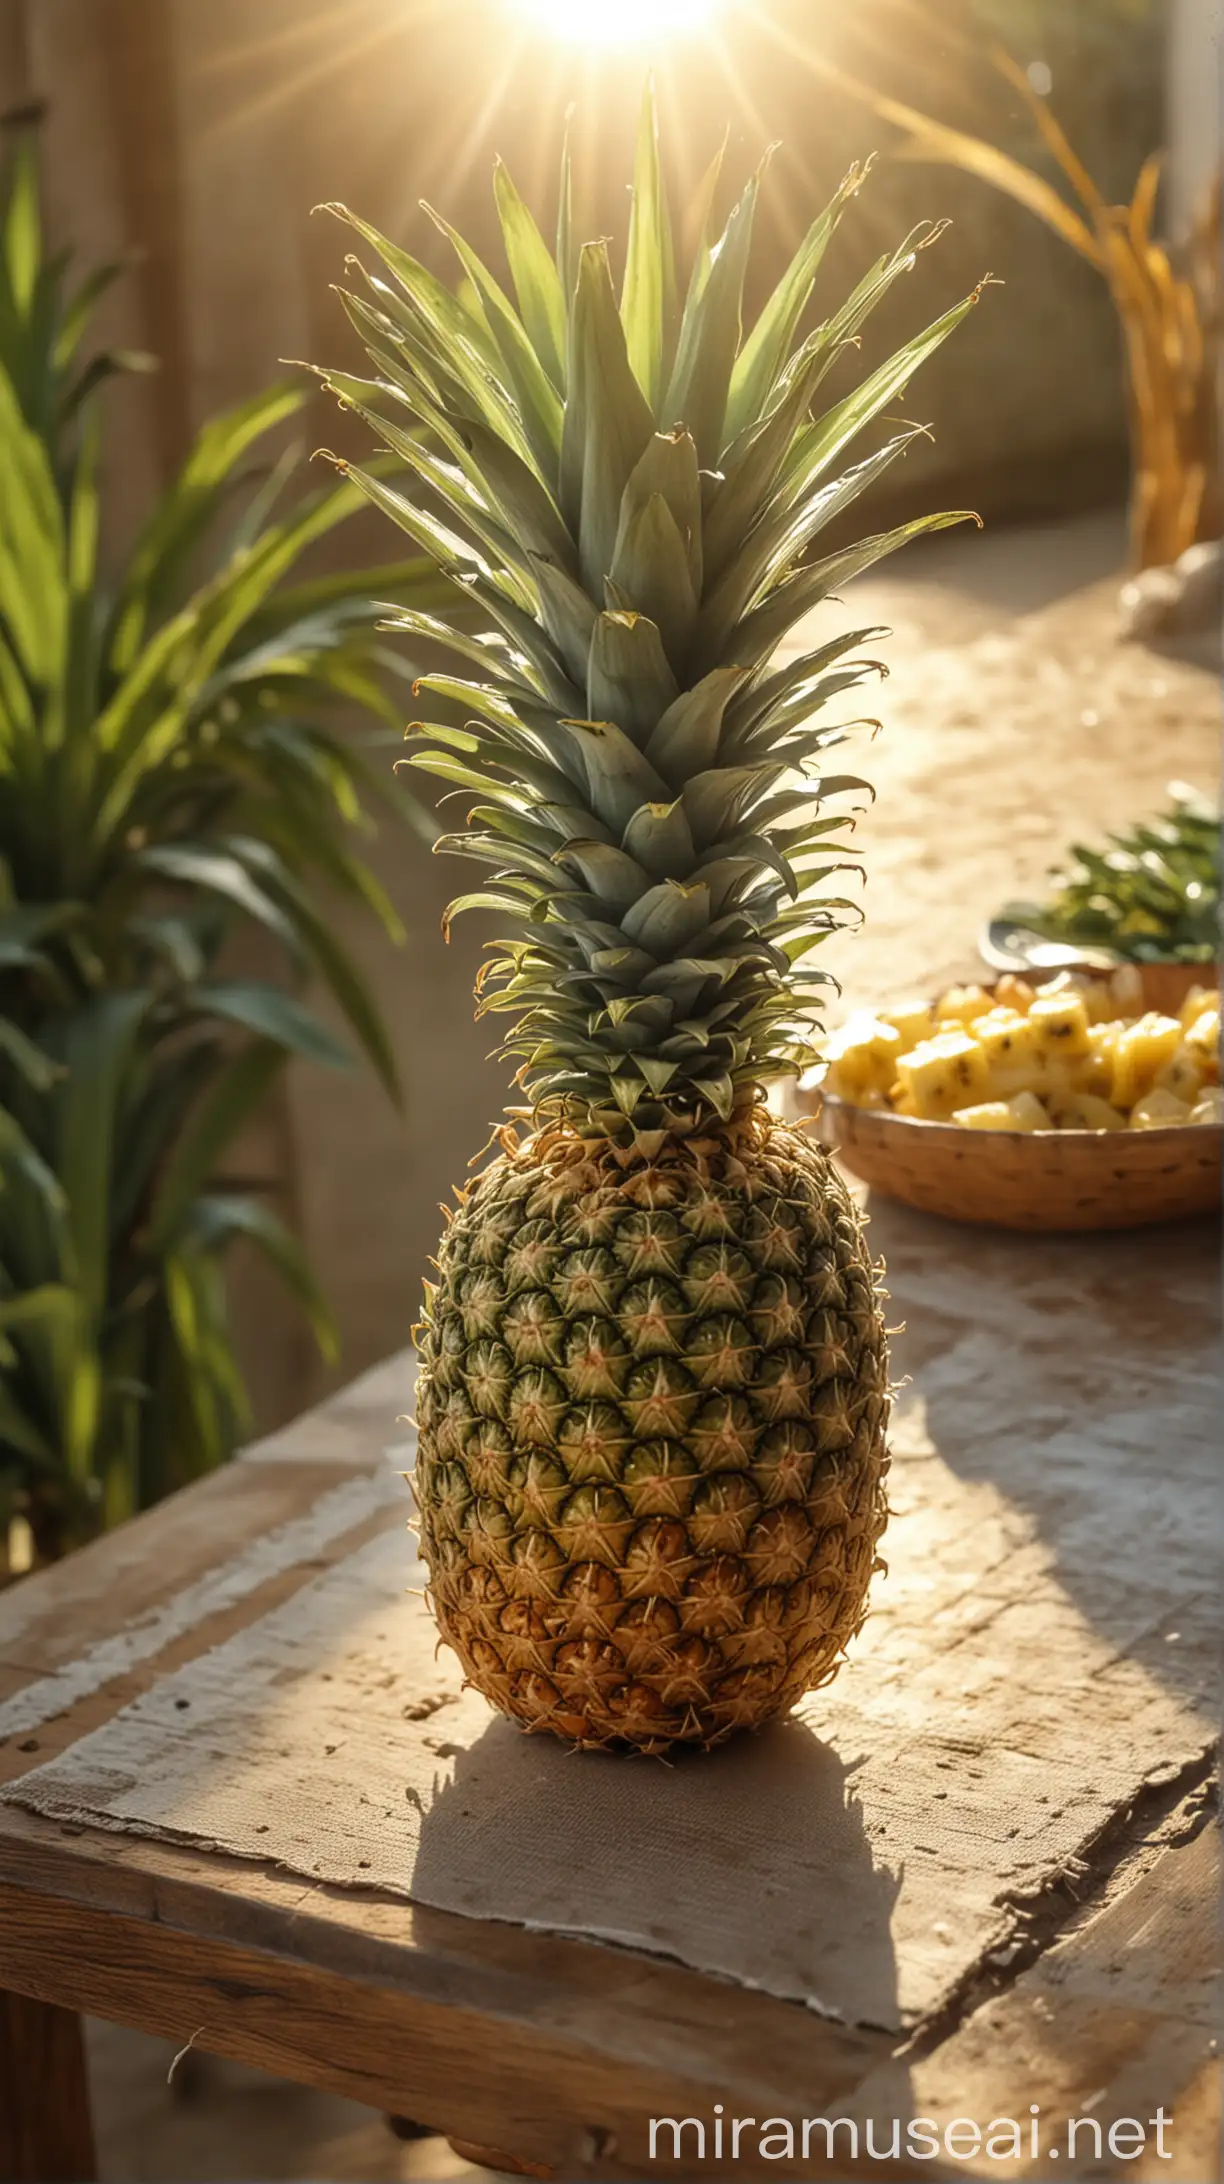 Fresh Pineapple on Exquisite Table Natural Background with Sunlight Effect